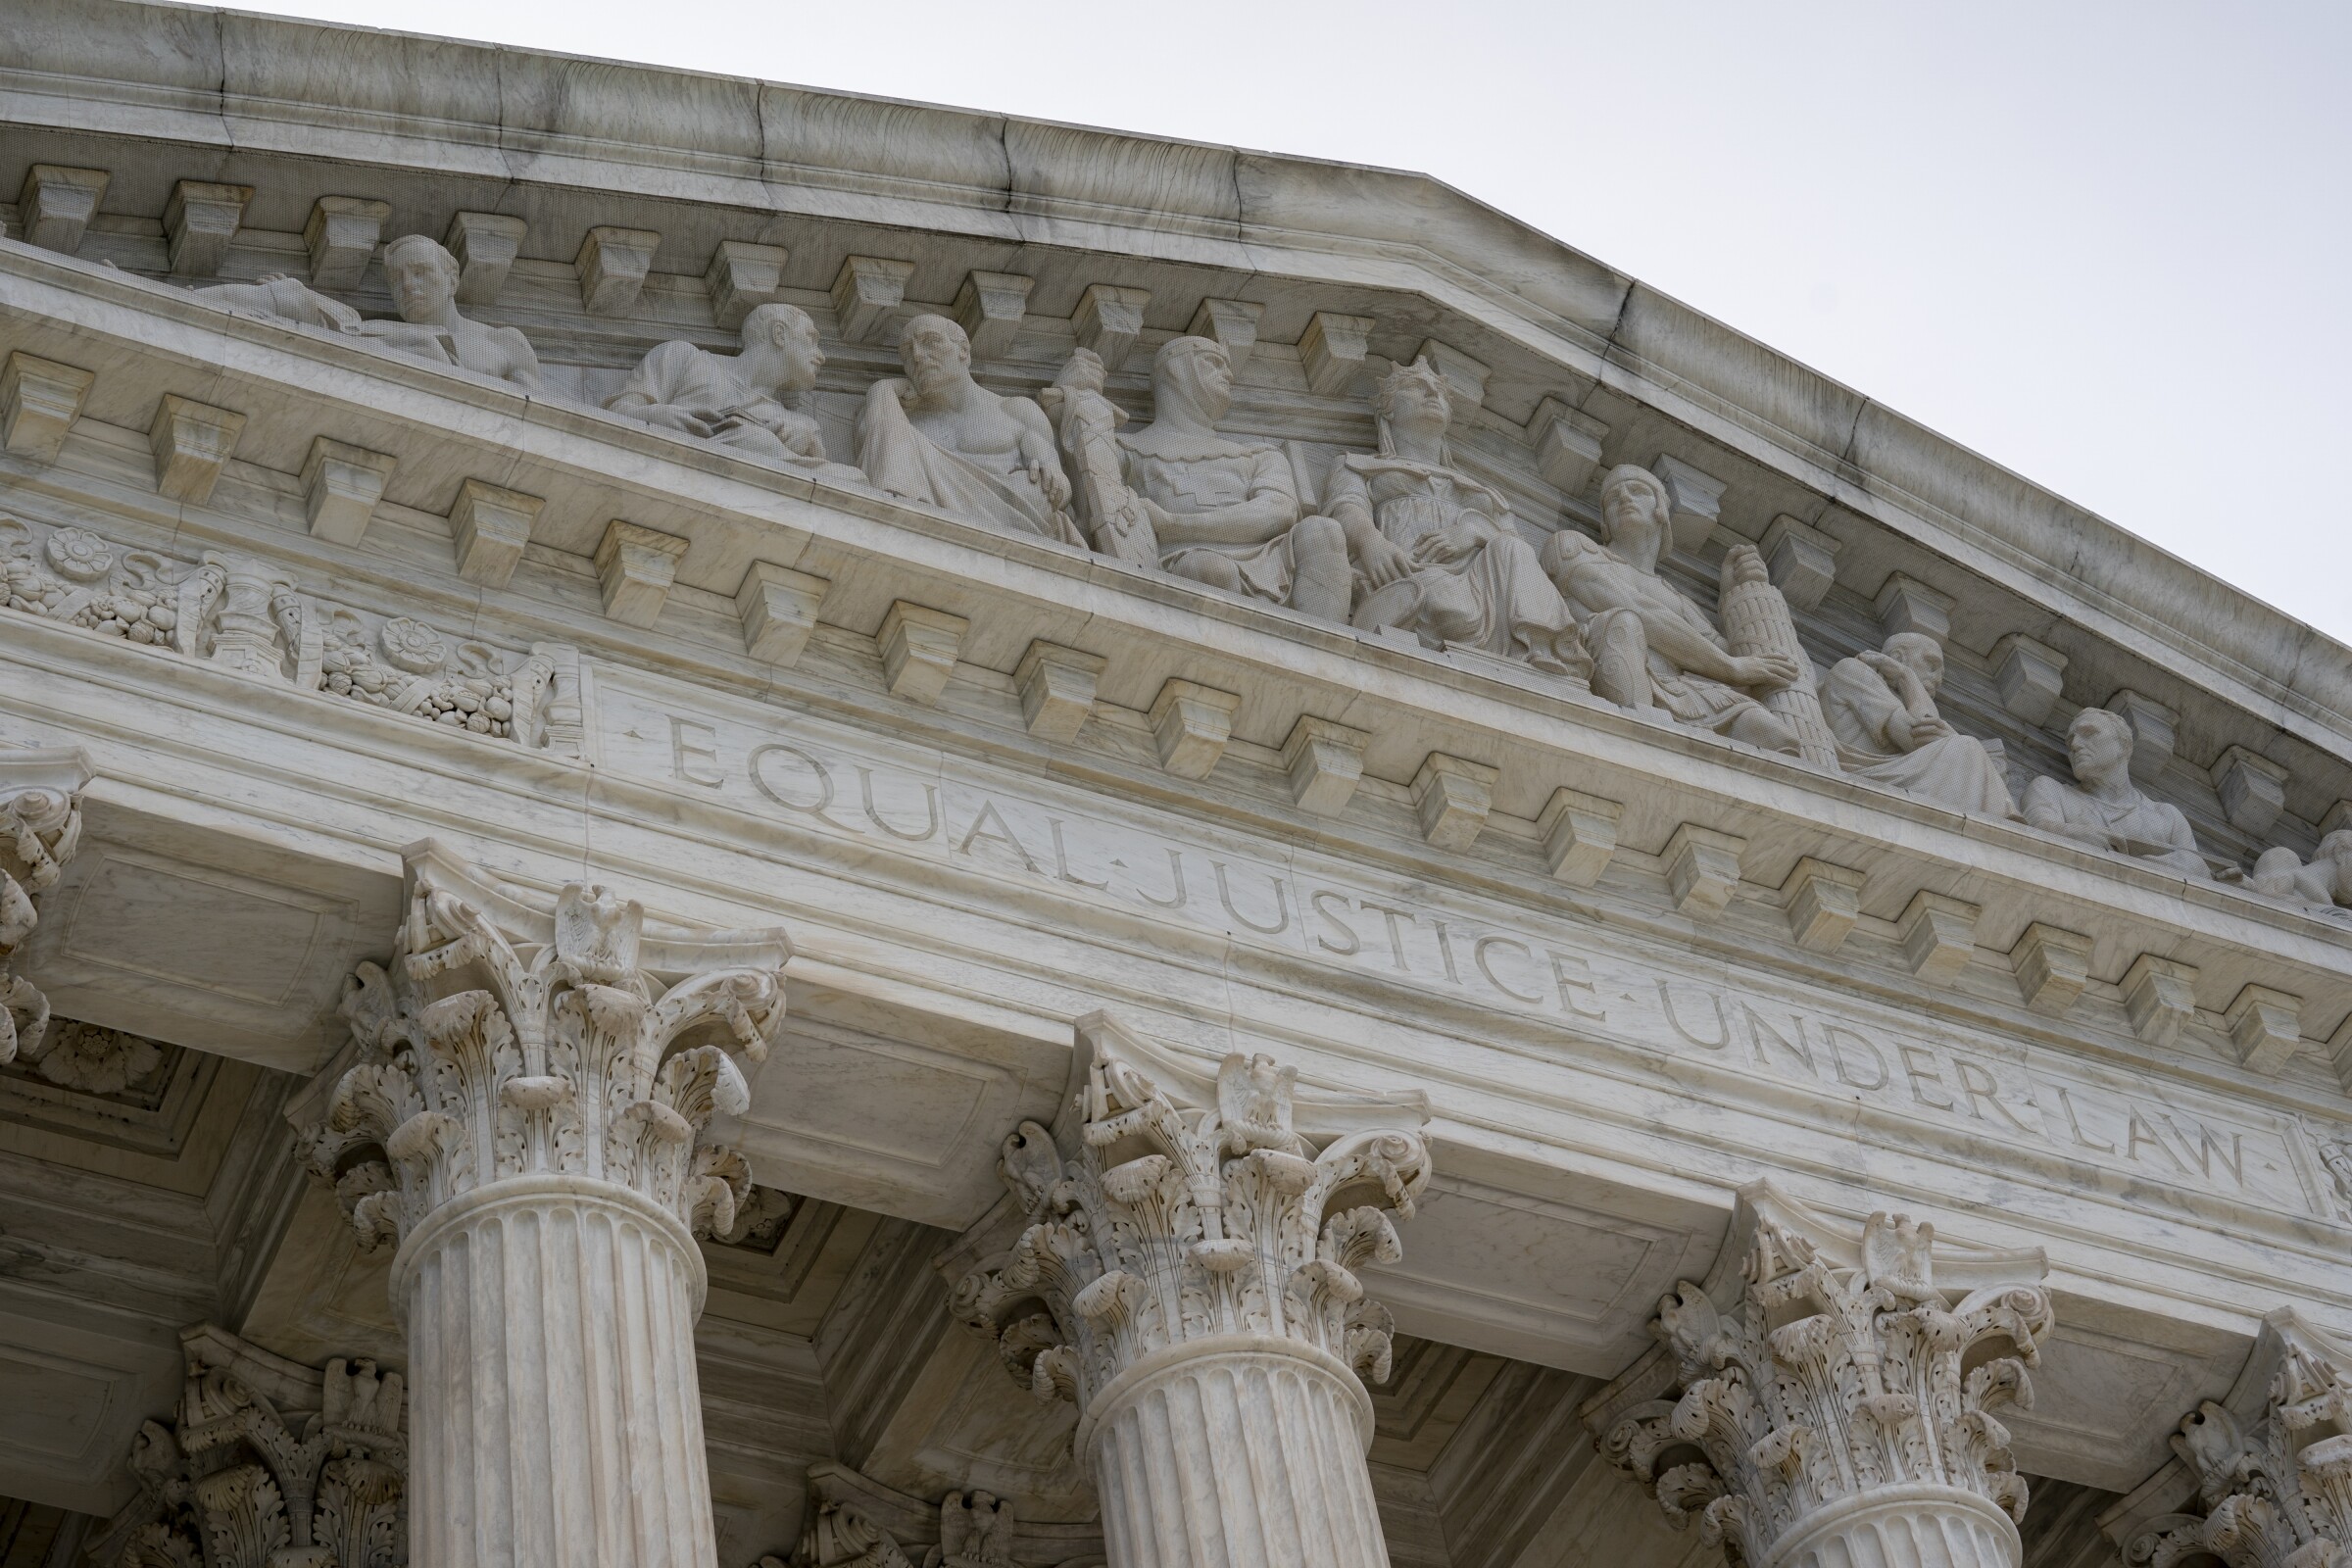 The pediment of the Supreme Court building, which is inscribed "Equal Justice Under Law." 